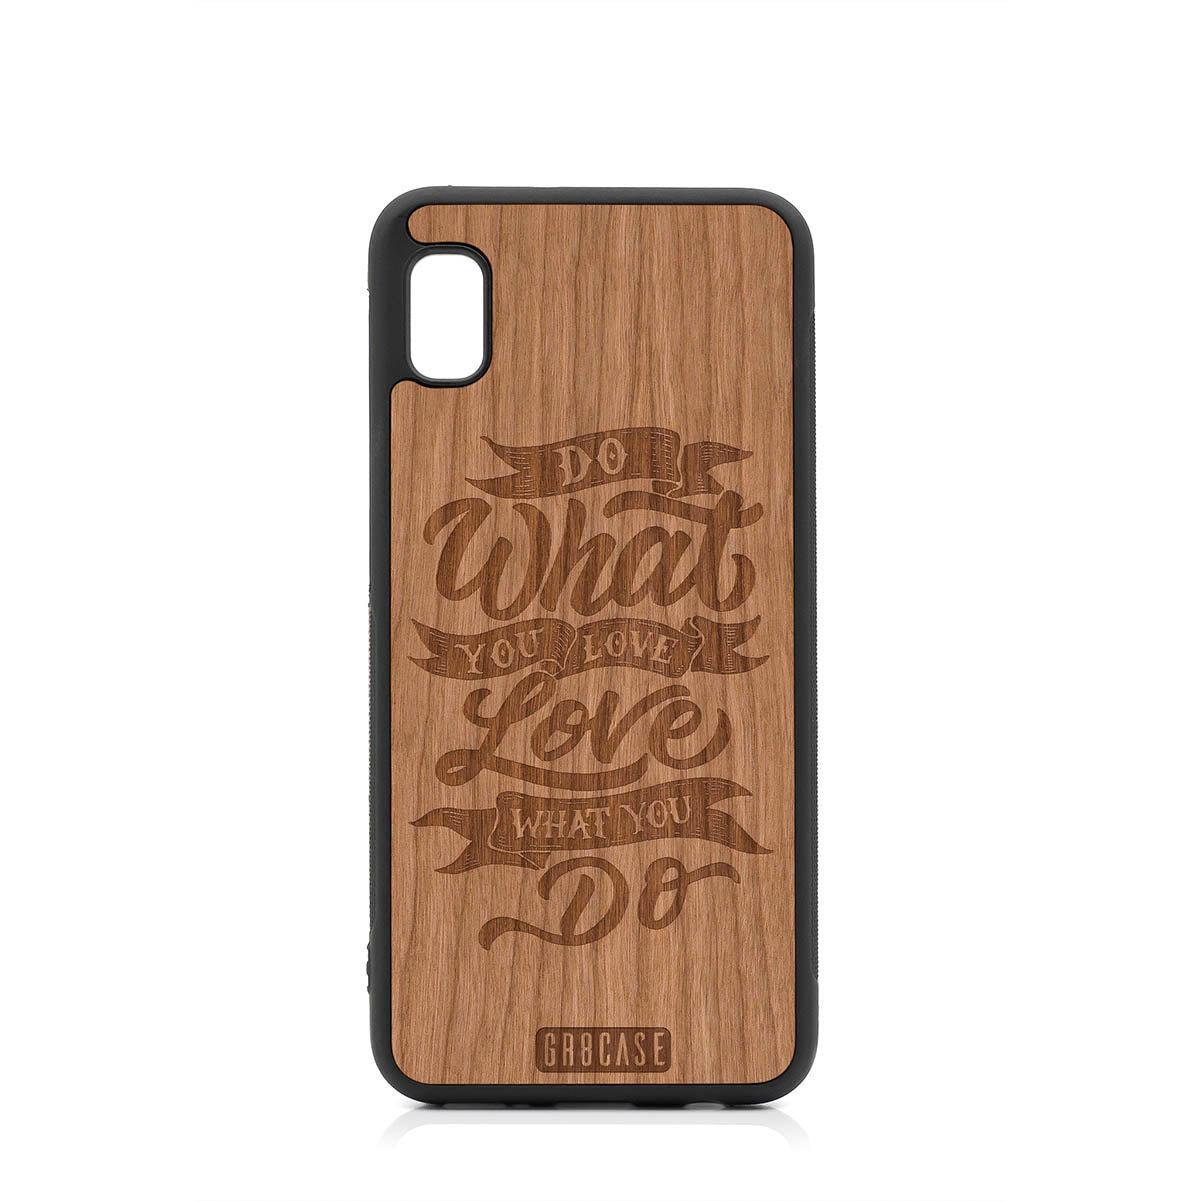 Do What You Love Love What You Do Design Wood Case For Samsung Galaxy A10E by GR8CASE